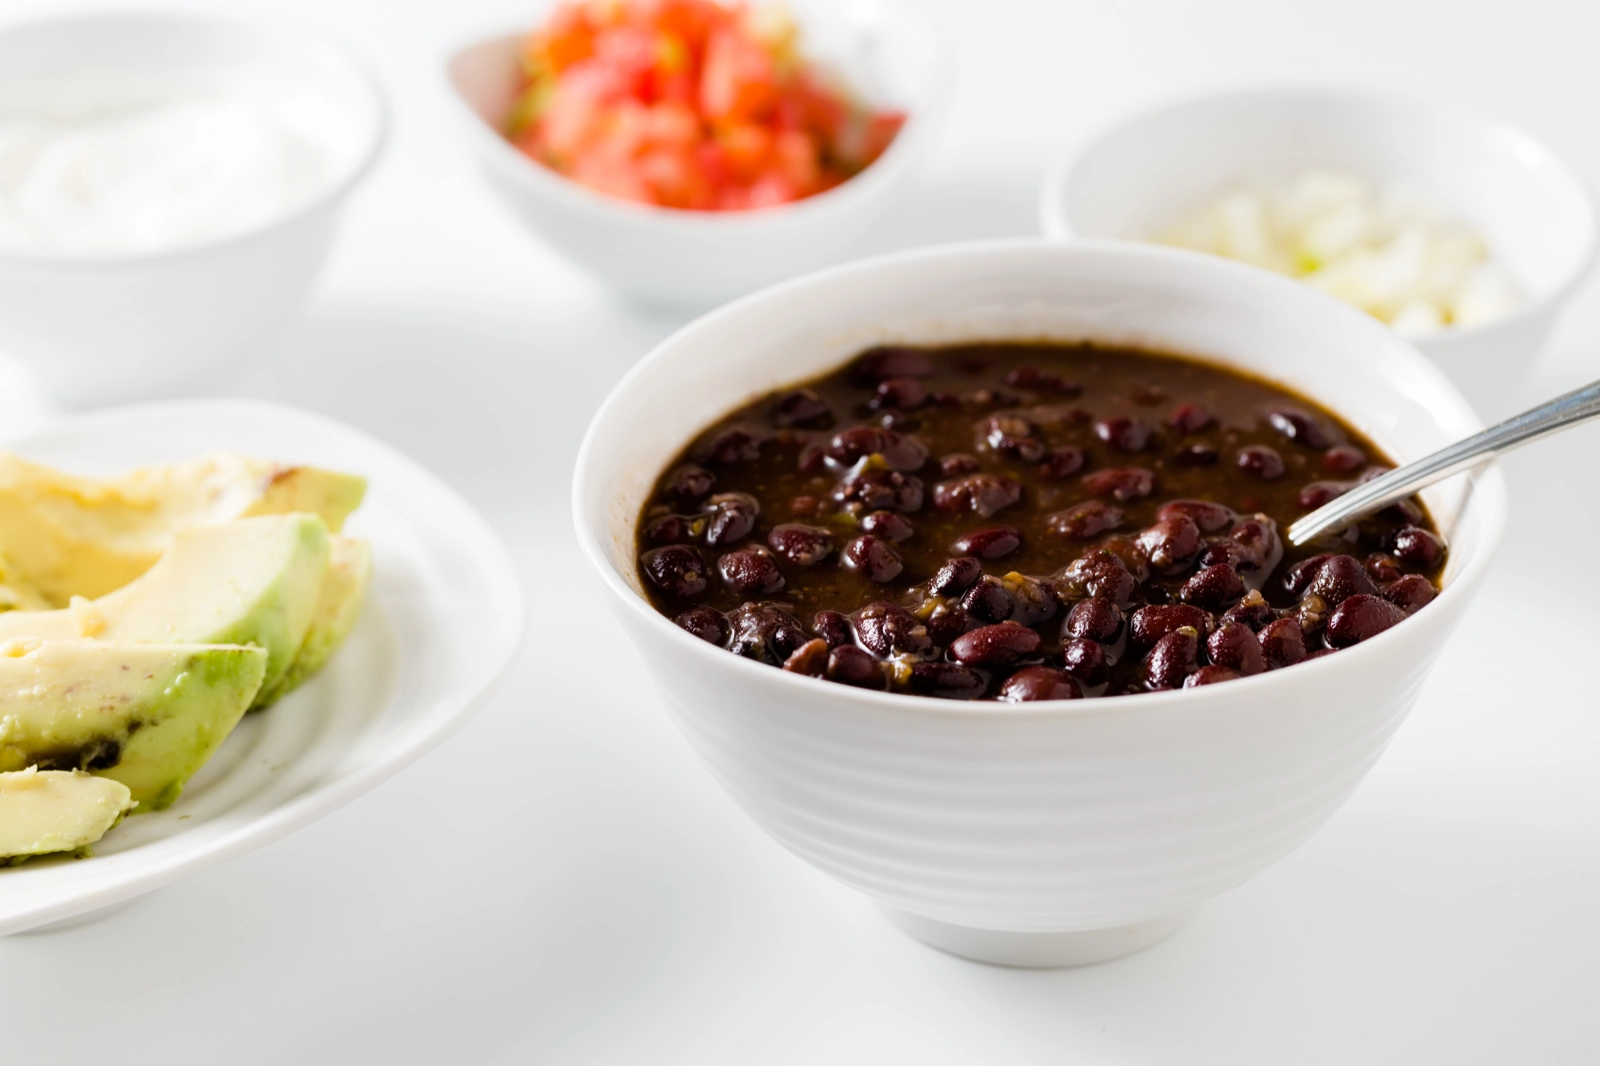 cuban-style-black-beans-with-beer